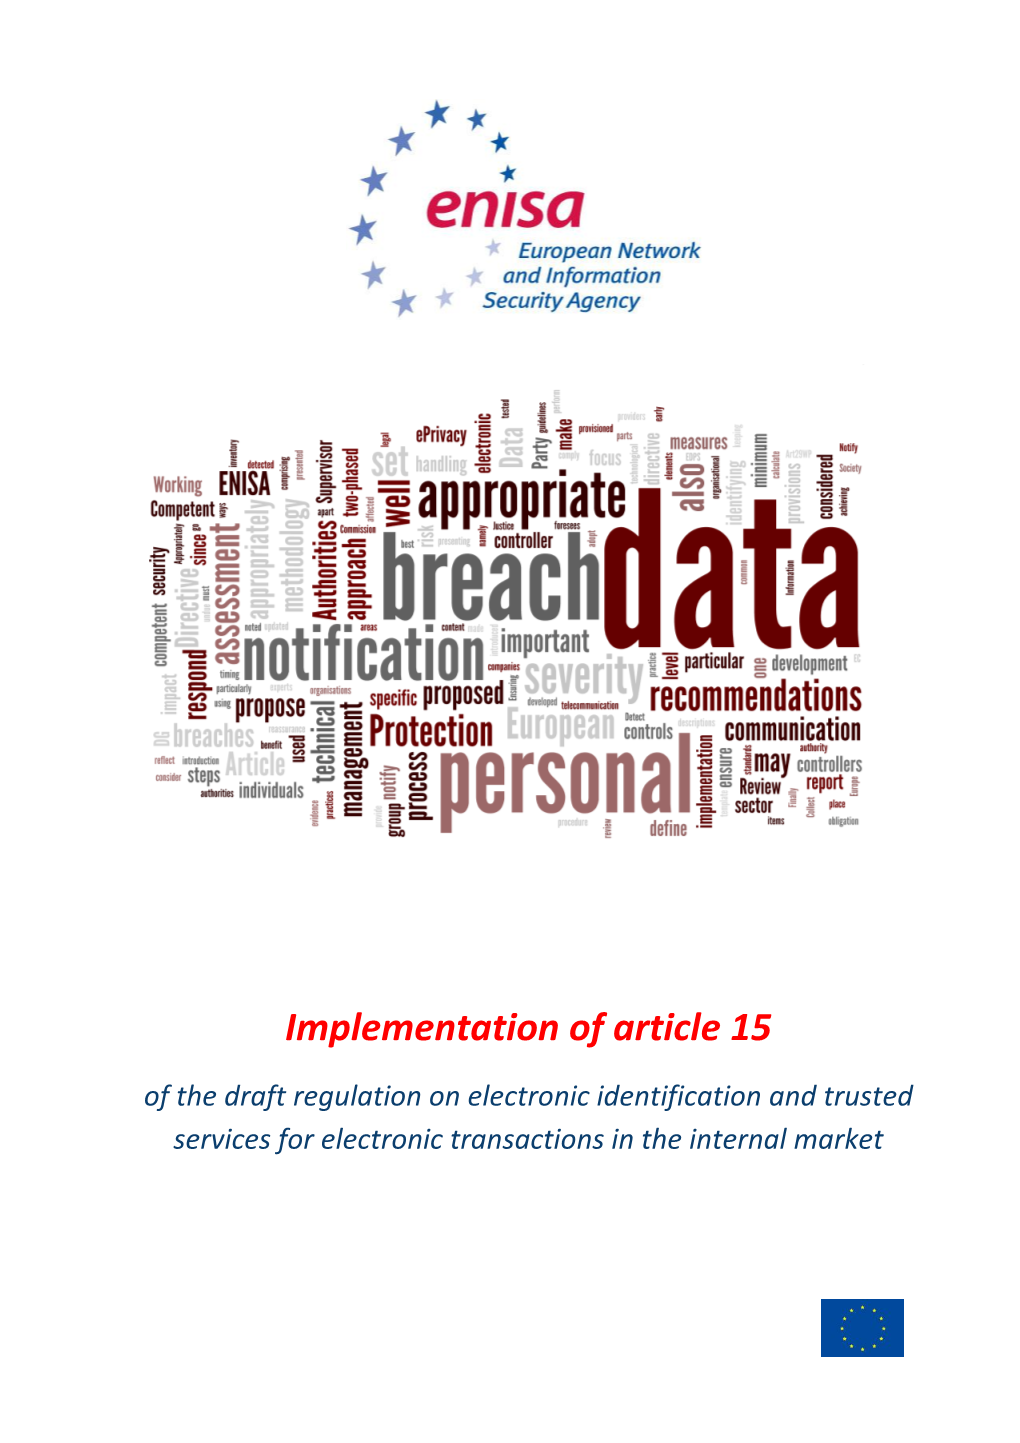 Implementation of Article 15 of the Draft Regulation on Electronic Identification and Trusted Services for Electronic Transactions in the Internal Market